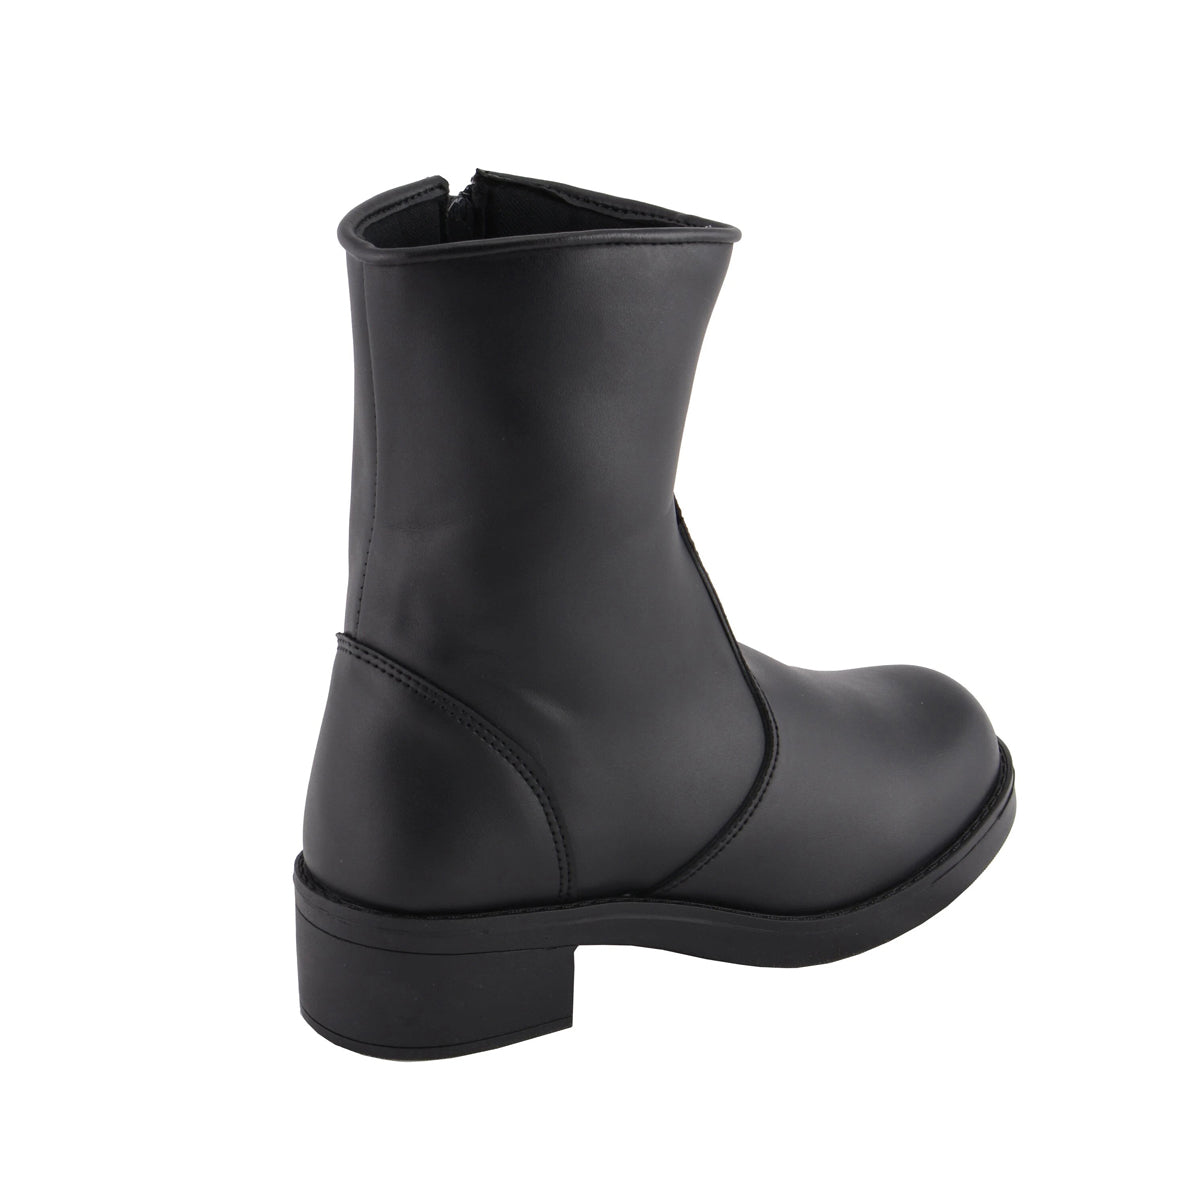 Ladies Black Super Clean Riding Boot with Side Zipper Entry